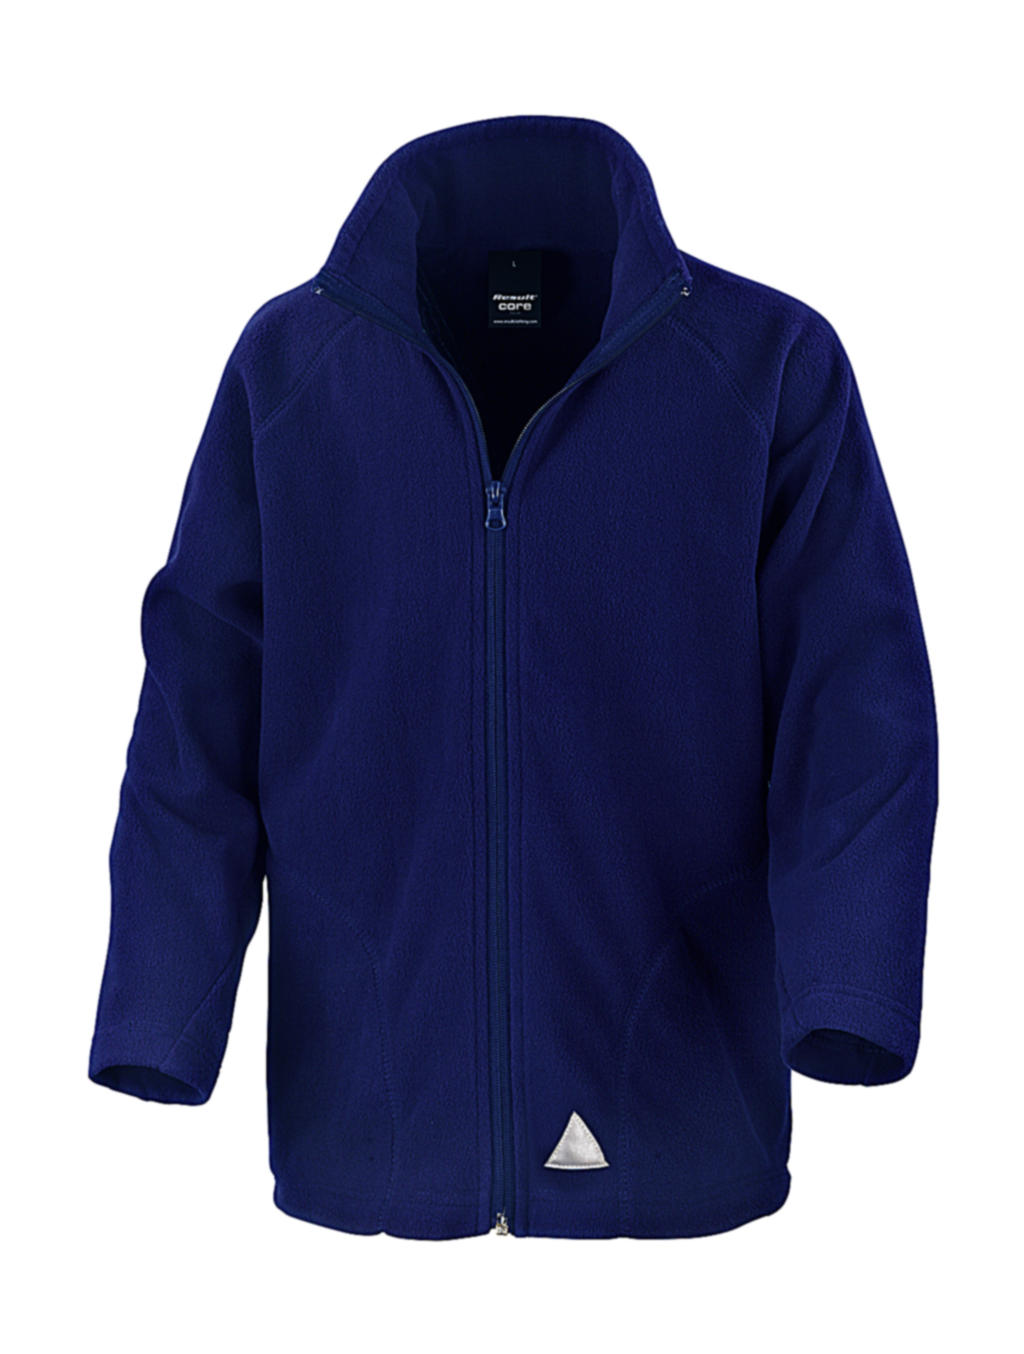  Junior/Youth Microfleece Top in Farbe Royal